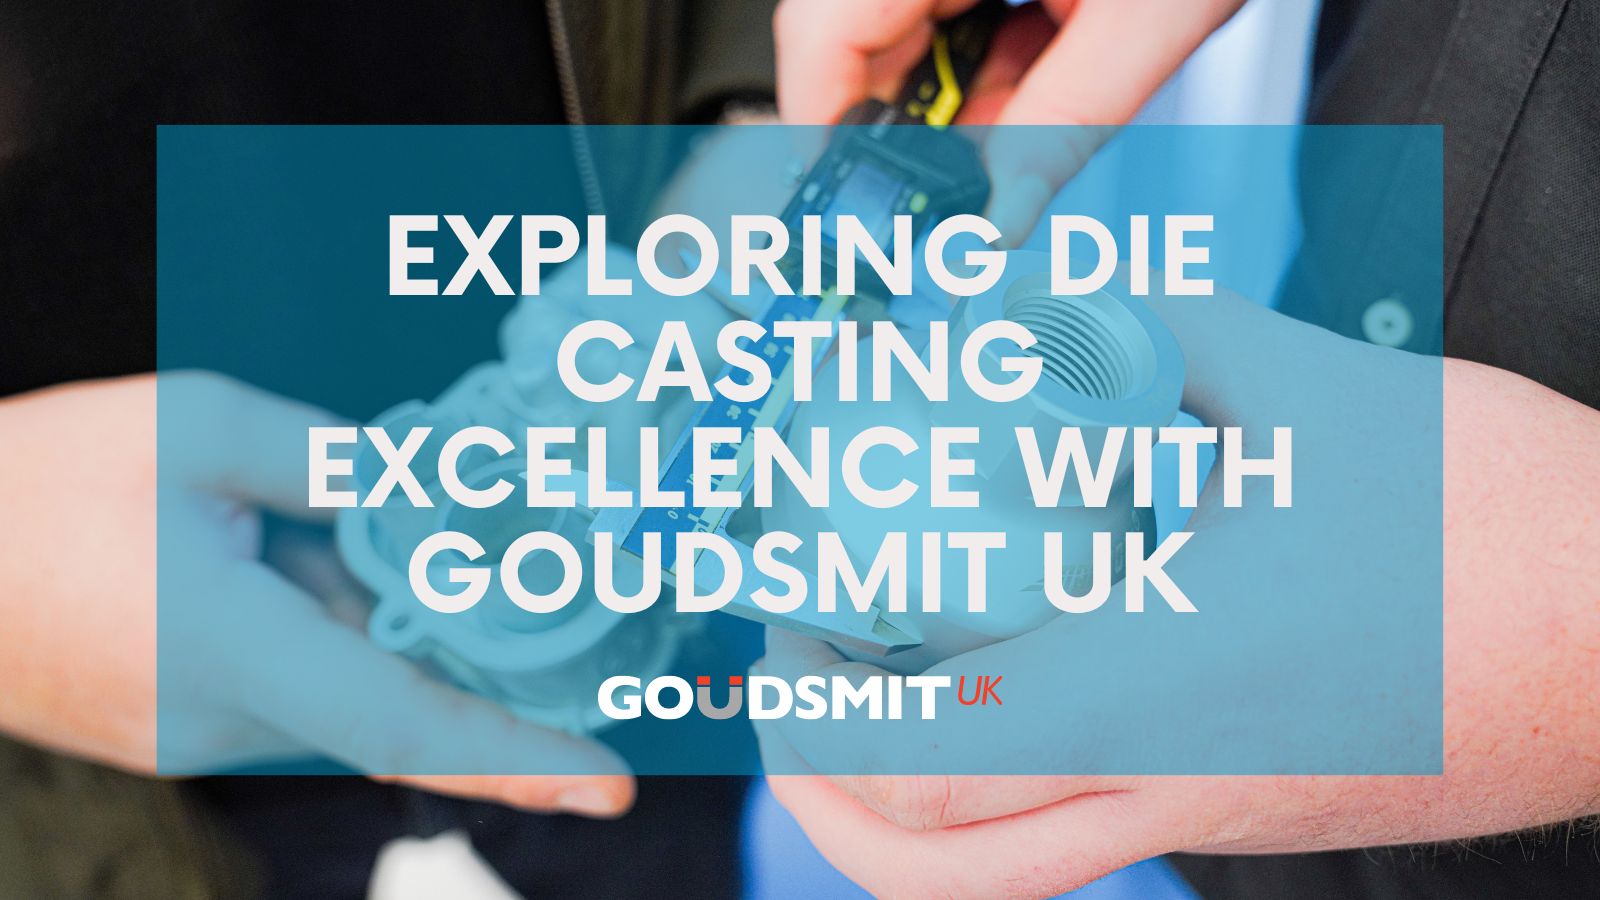 Types of die casting available at Goudsmit UK